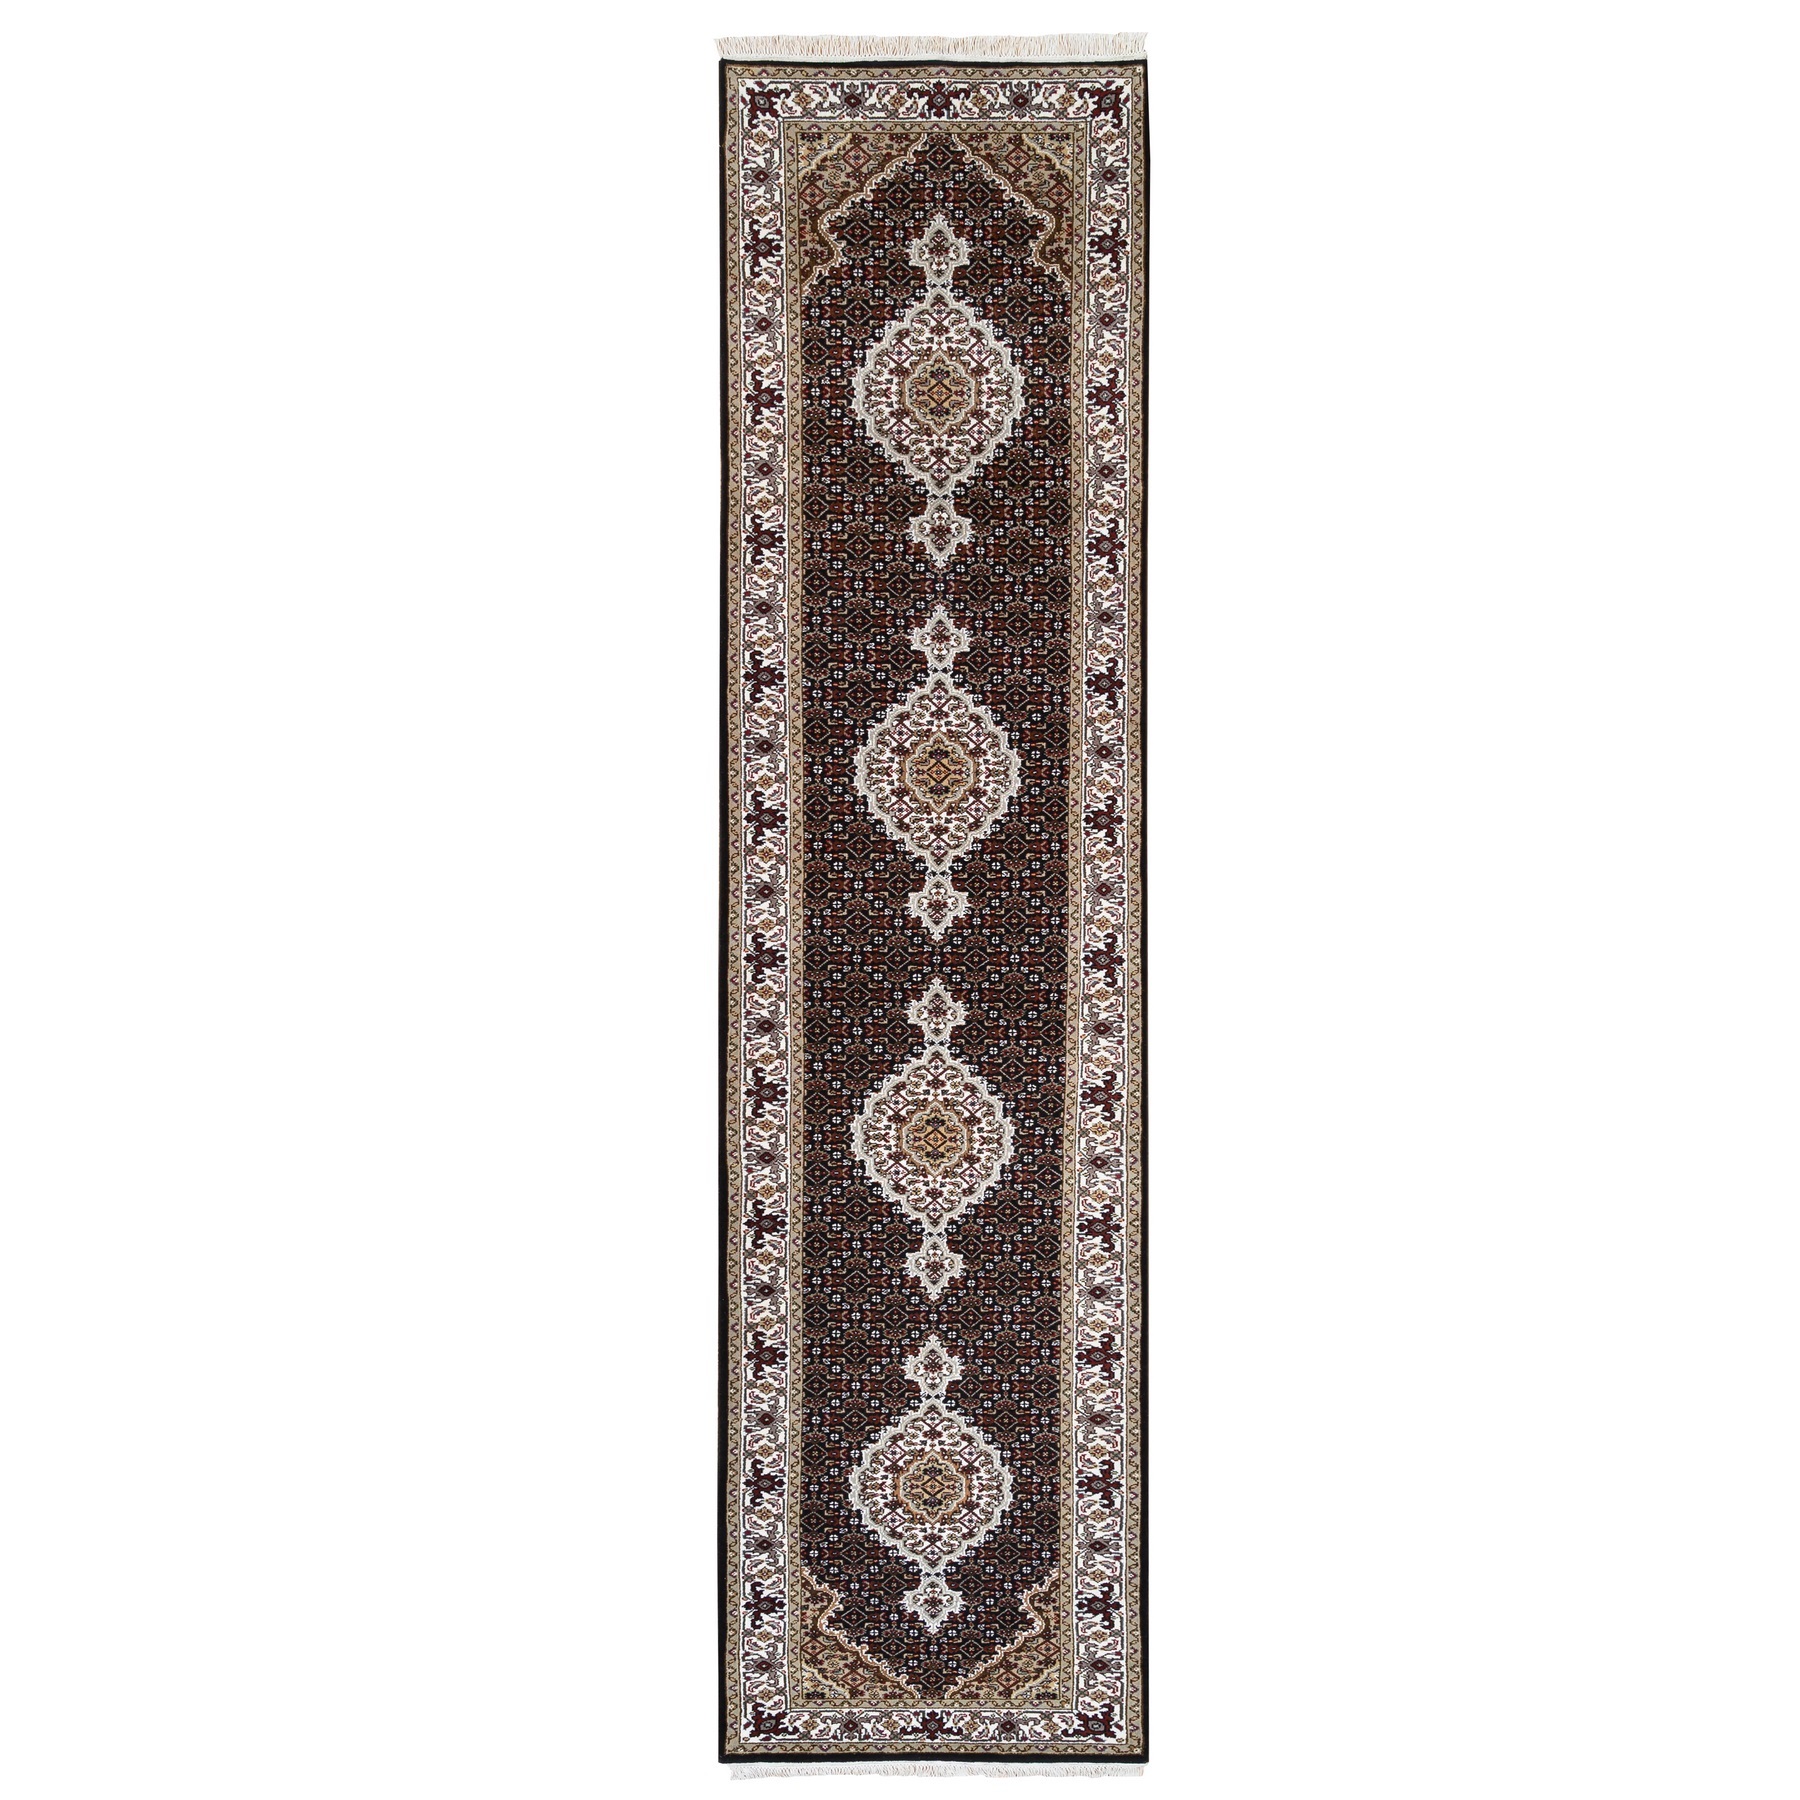 Pirniakan Collection Hand Knotted Black Rug No: 1125004